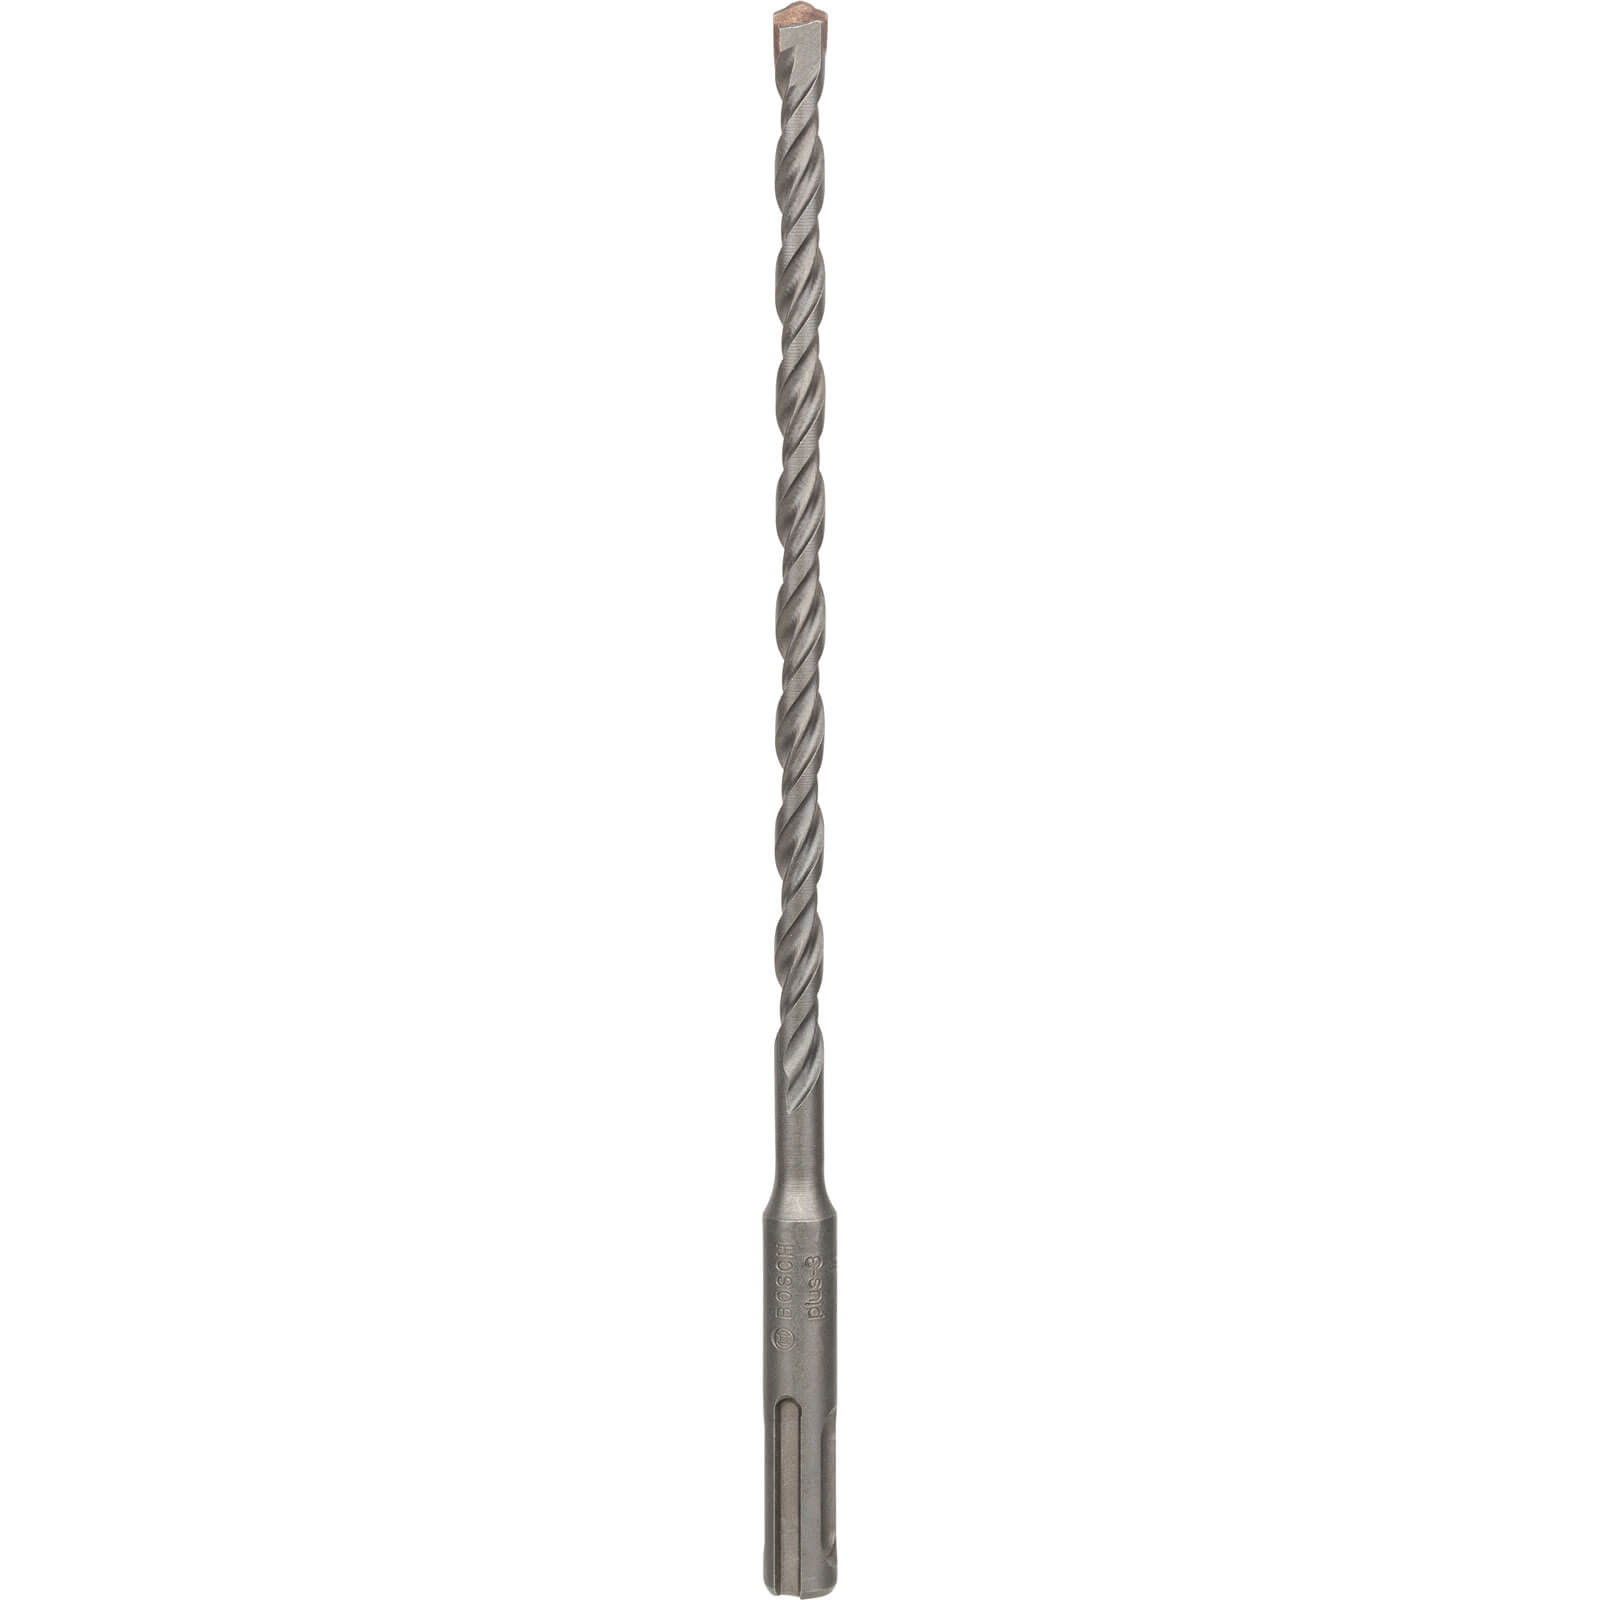 Image of Bosch Series 3 SDS Plus Masonry Drill Bit 7mm 210mm Pack of 1